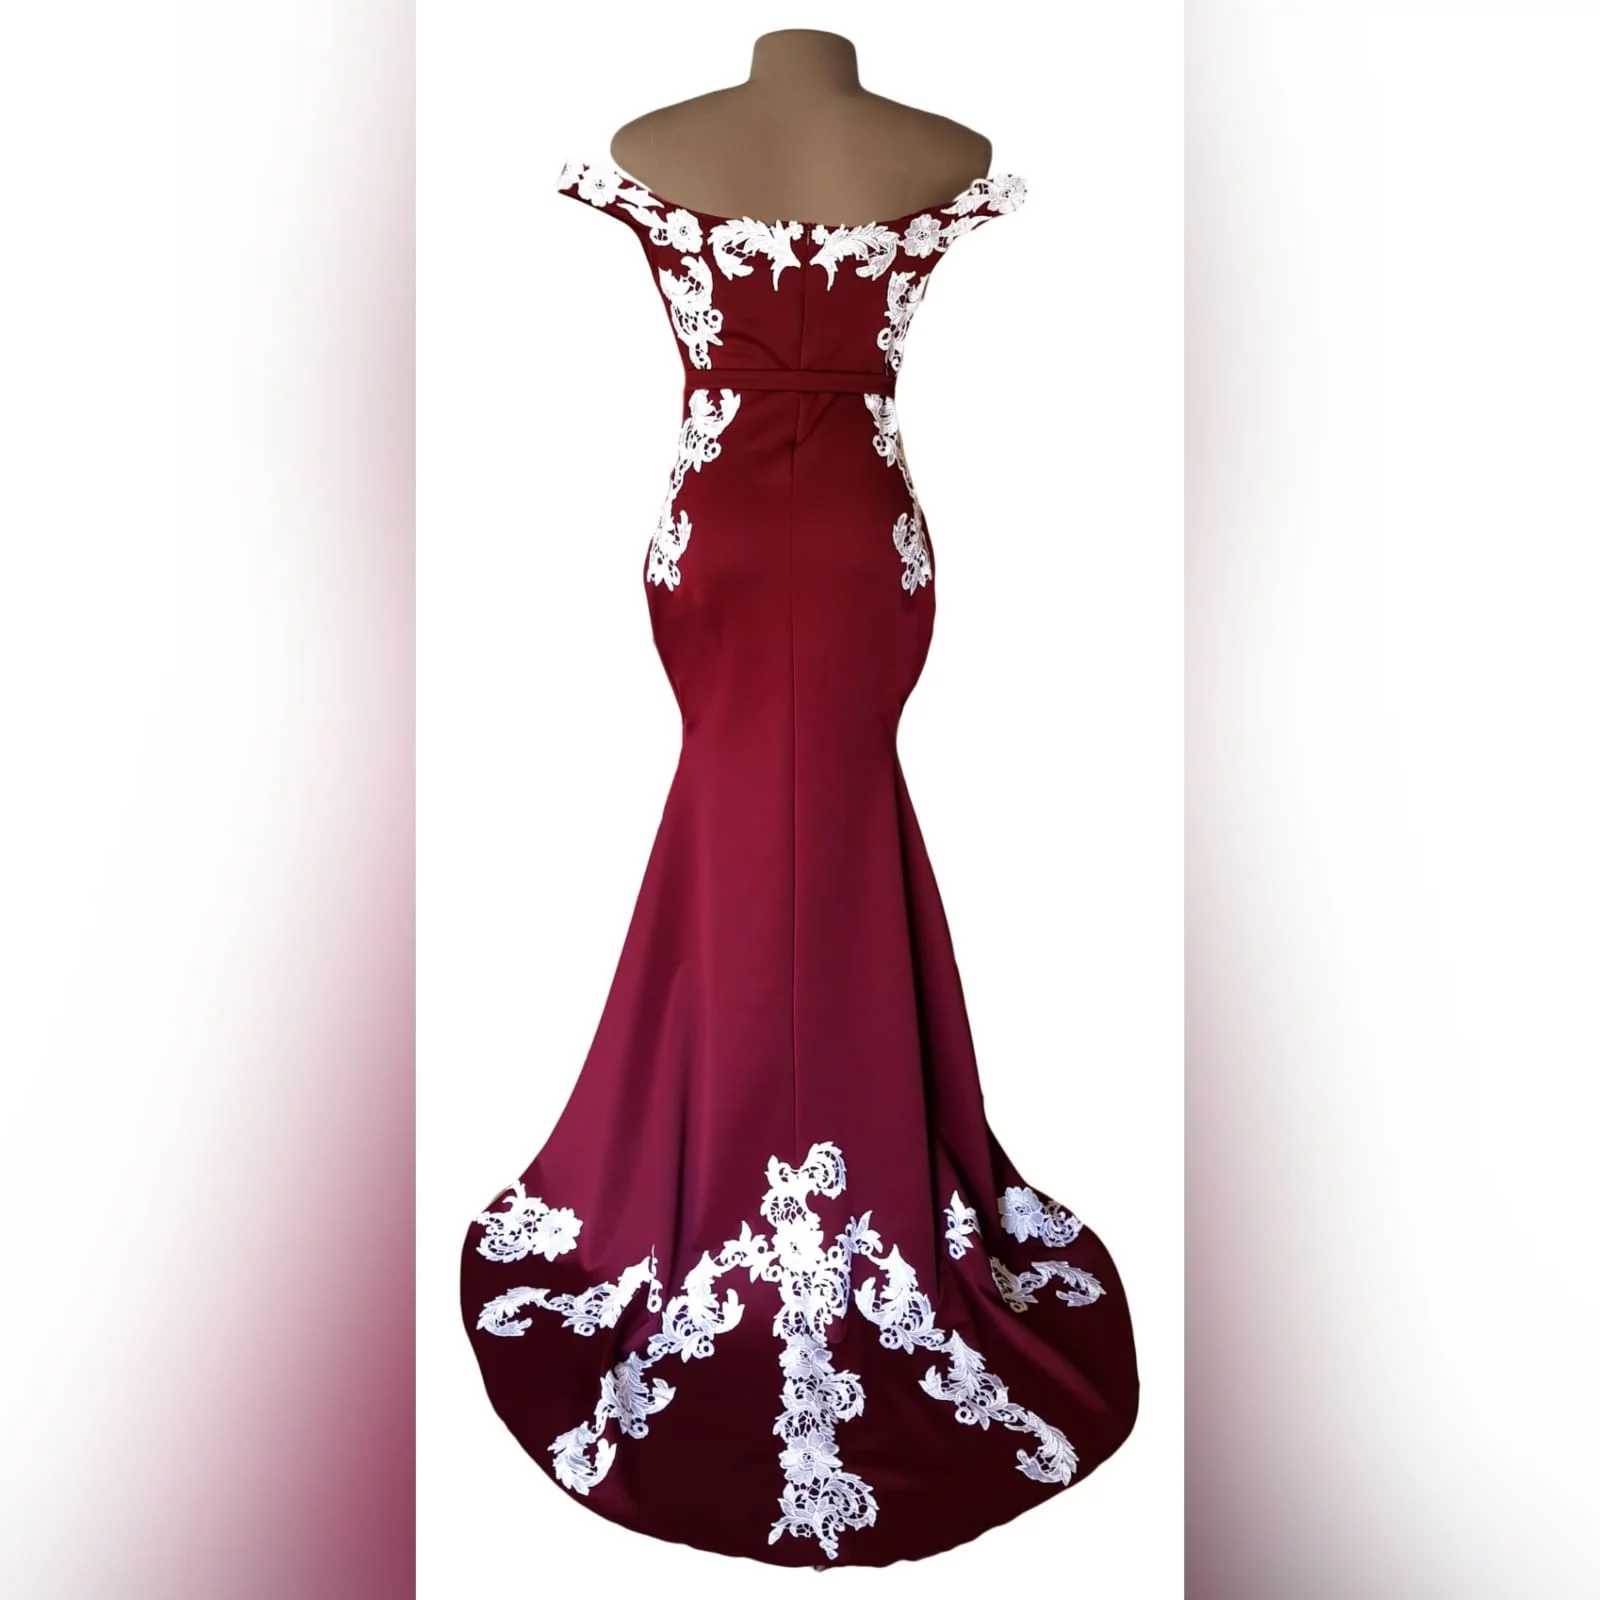 Maroon and white off shoulder soft mermaid matric dress 2 maroon and white off shoulder soft mermaid matric dress. With bodice, hips and train detailed with white lace.